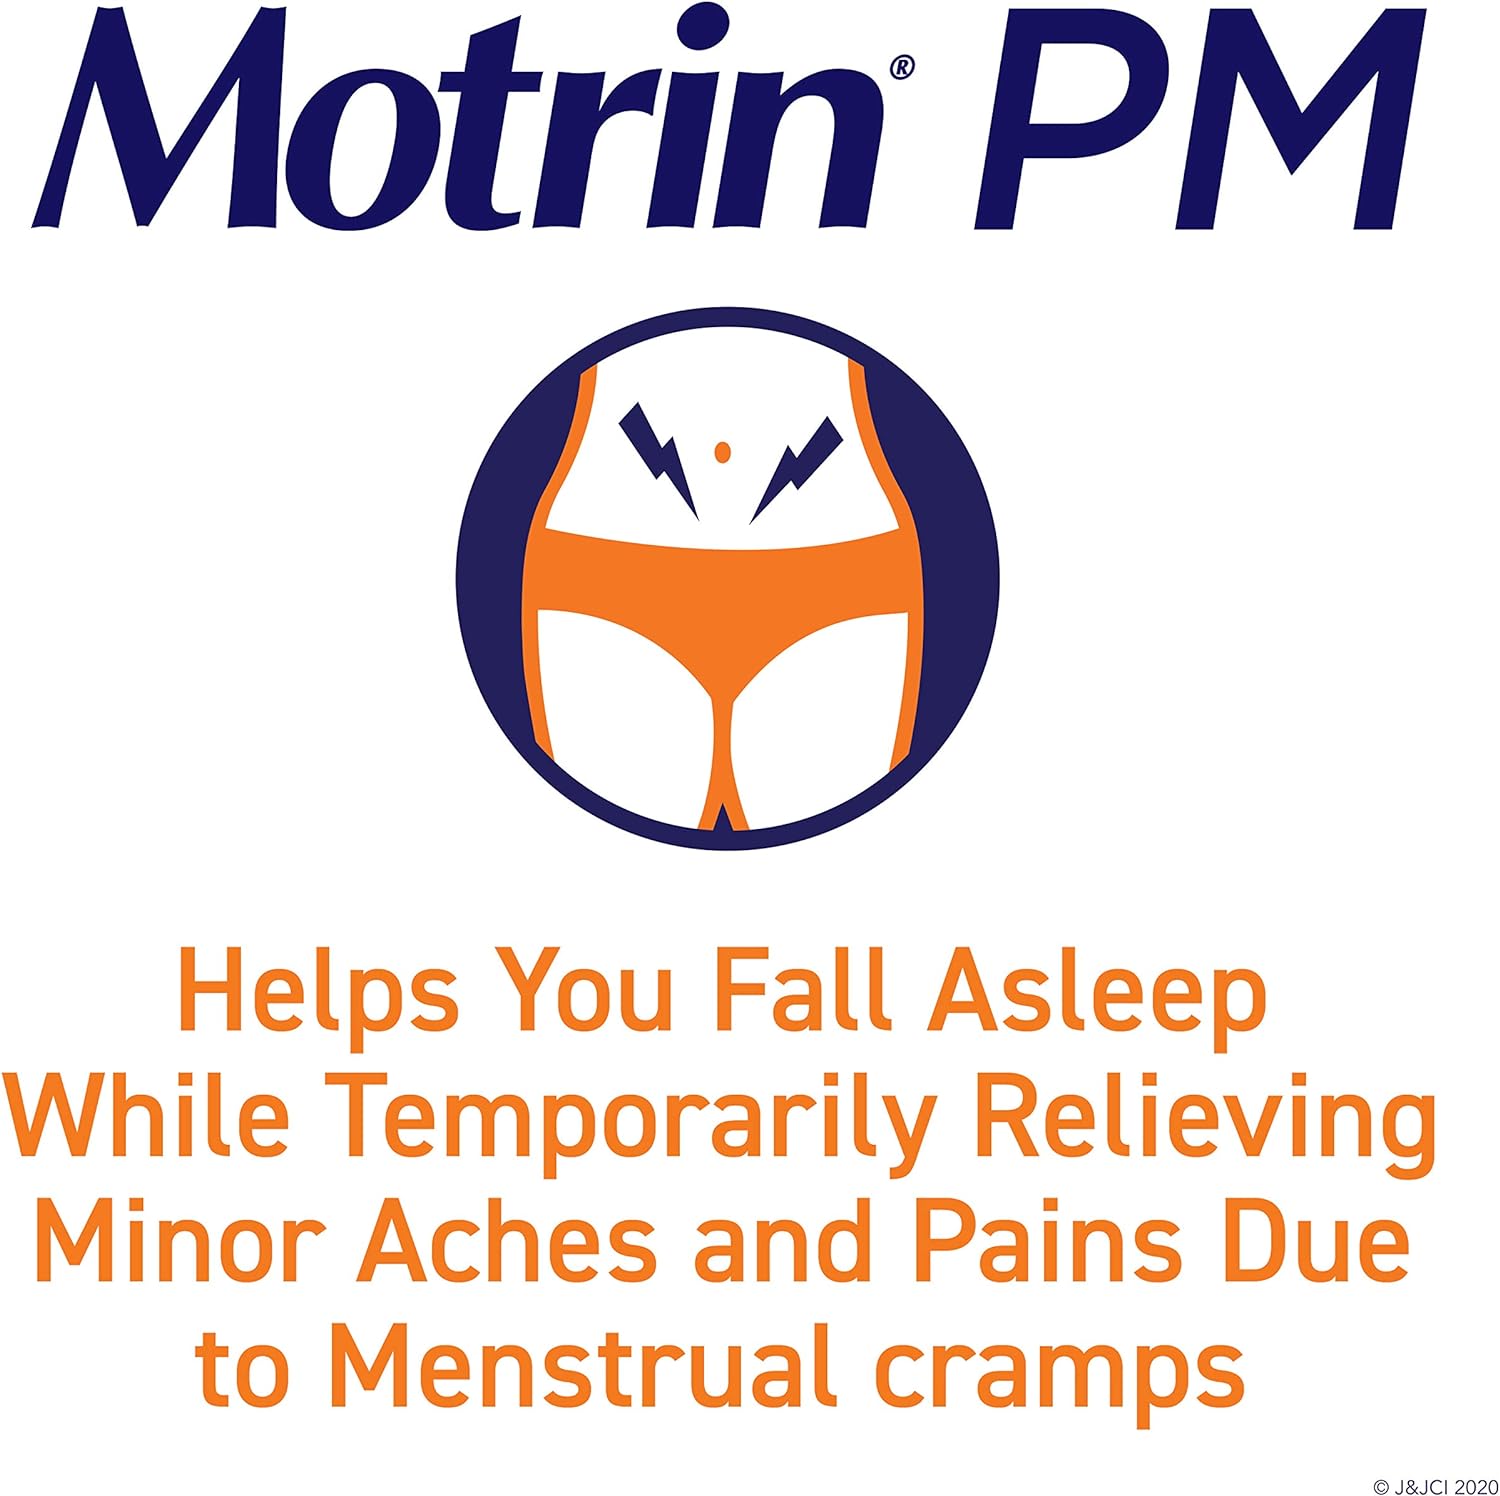 Motrin PM Caplets, 200 mg Ibuprofen & 38 mg Sleep Aid, Nighttime Relief for Minor Pains, 80 ct. : Health & Household